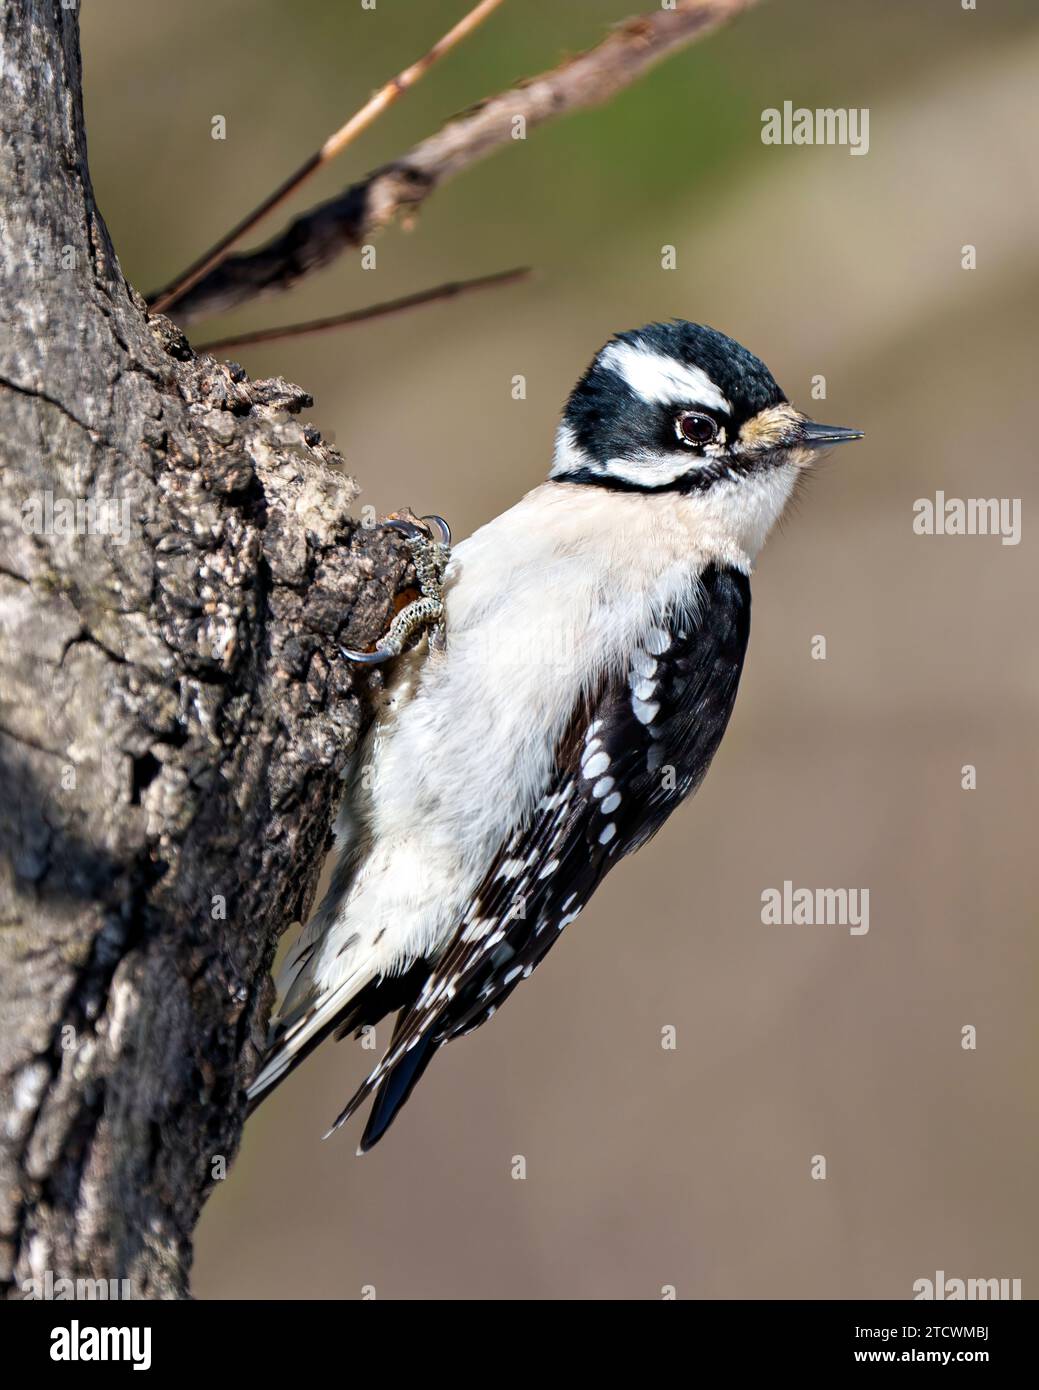 Woodpecker female on a branch with a blur background in its environment and habitat surrounding diplaying white and black feather plumage. Stock Photo